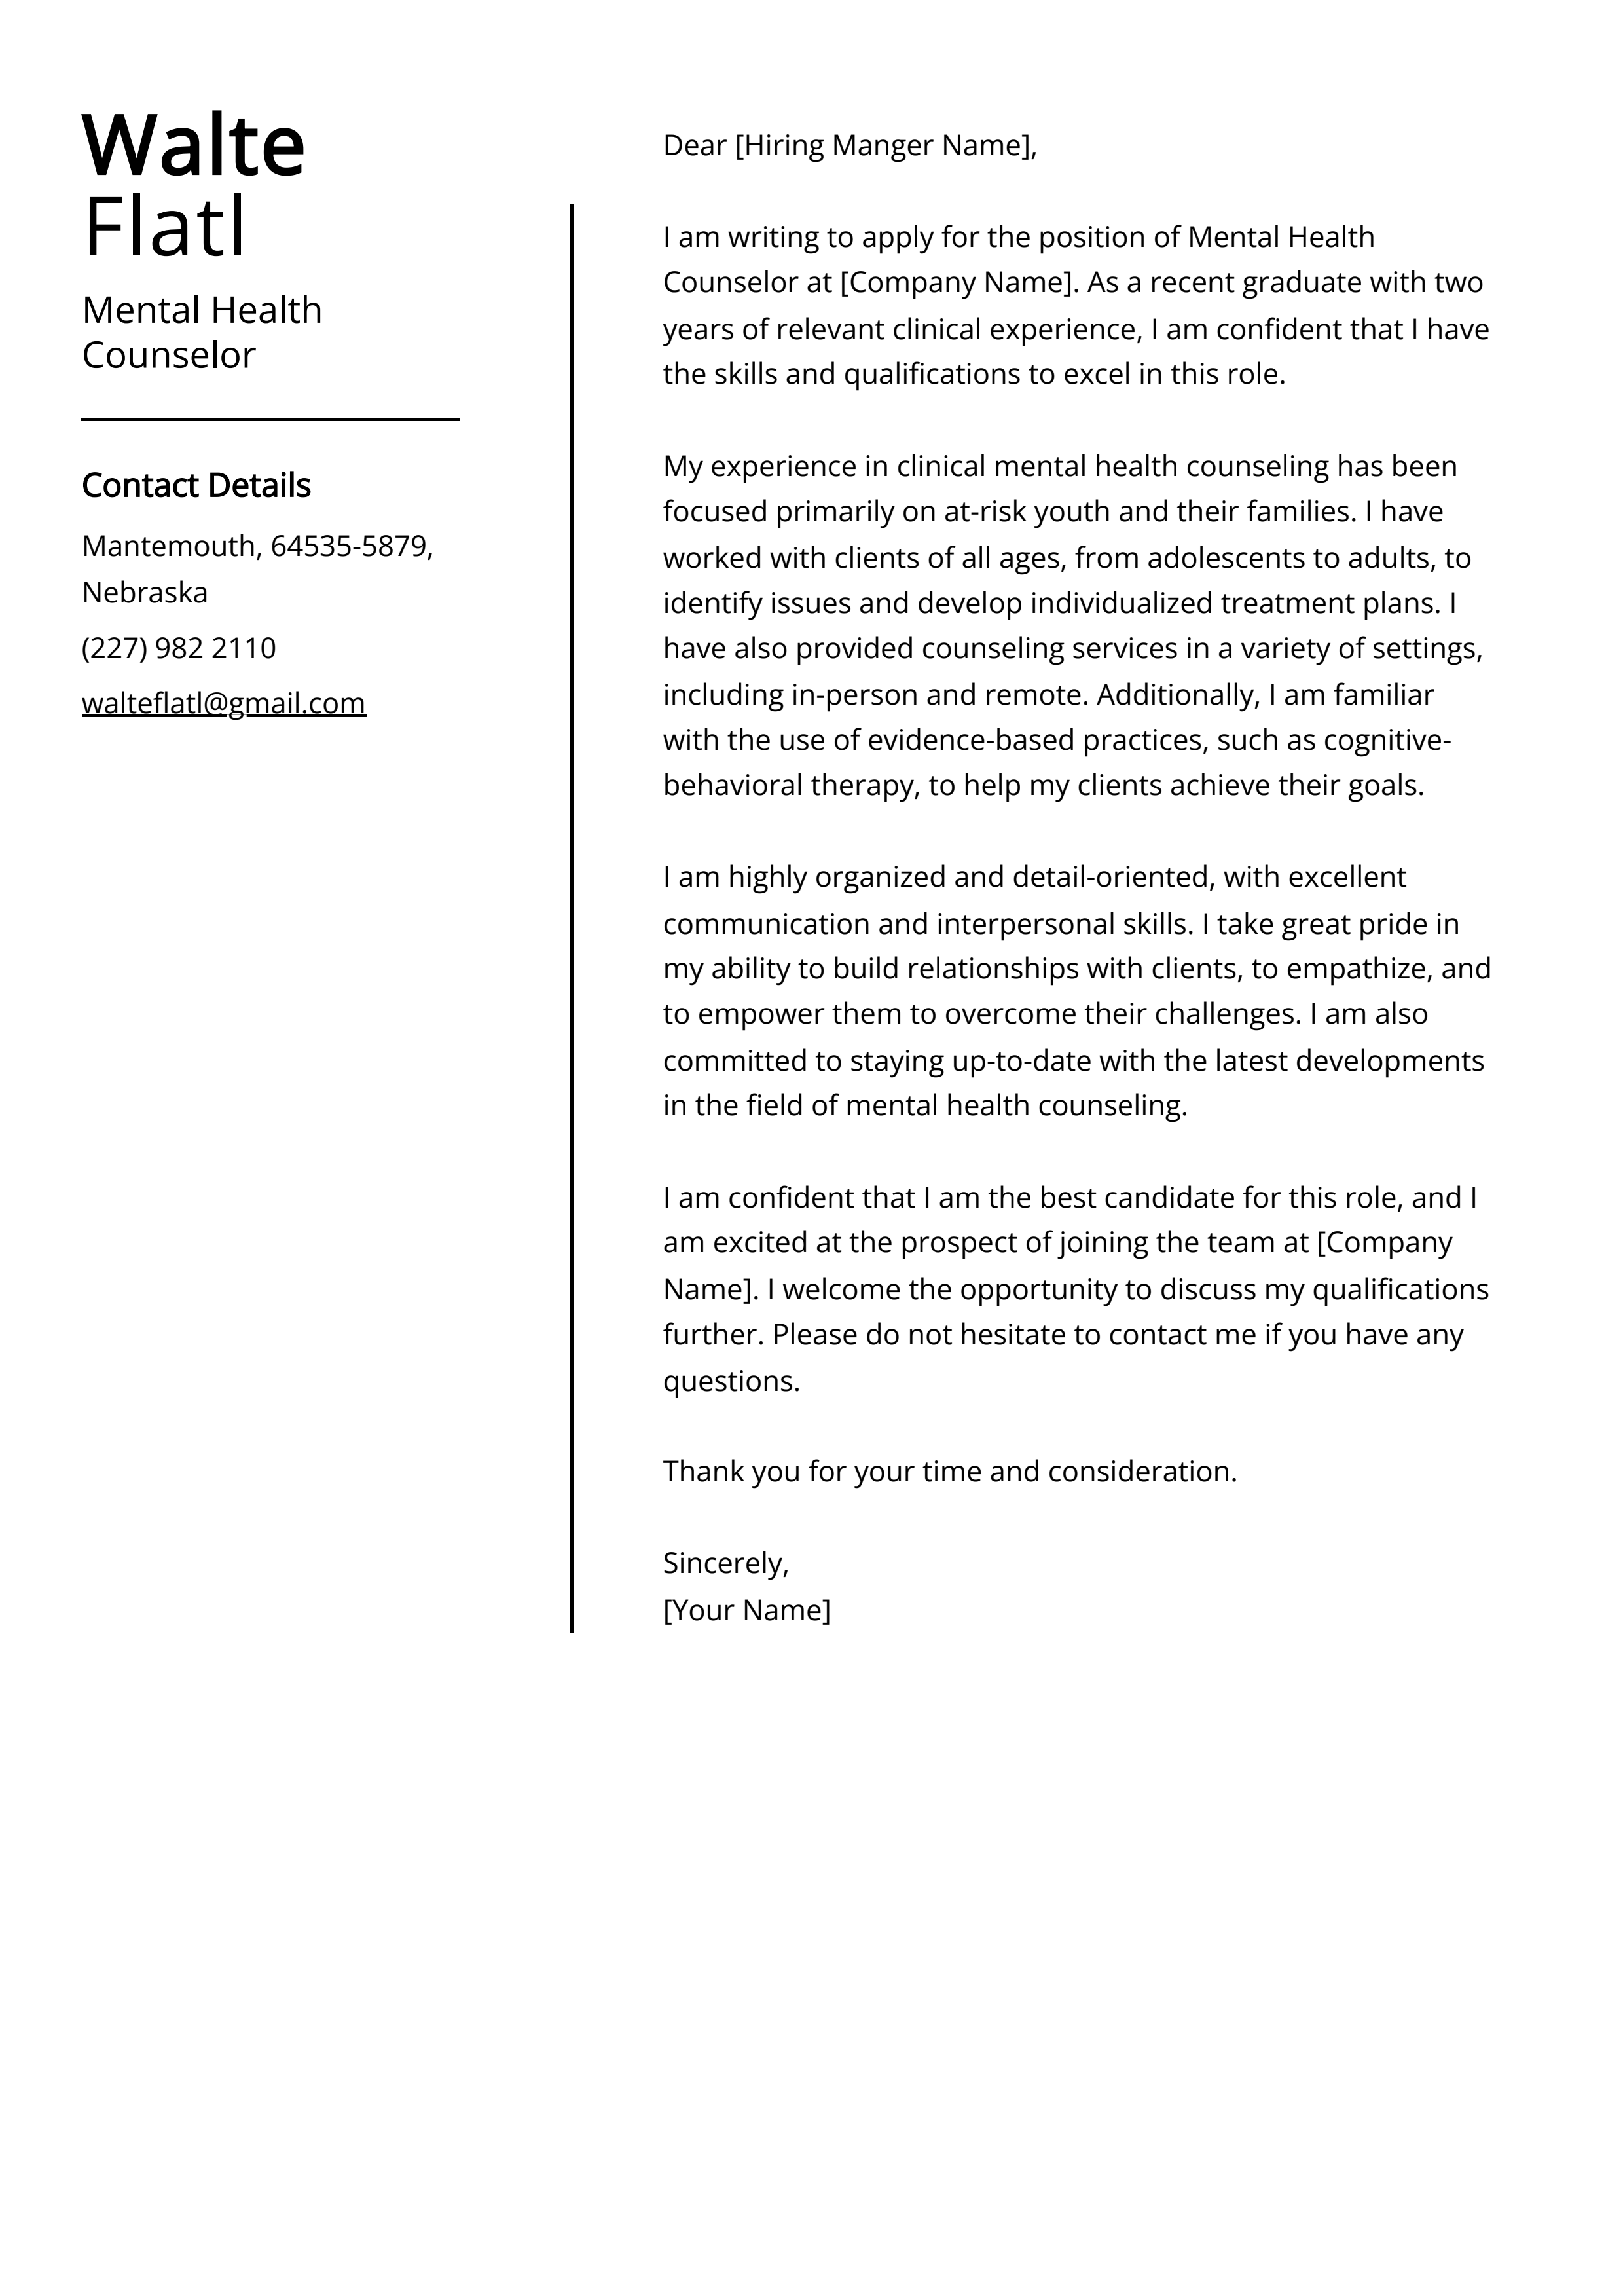 Mental Health Counselor Cover Letter Example